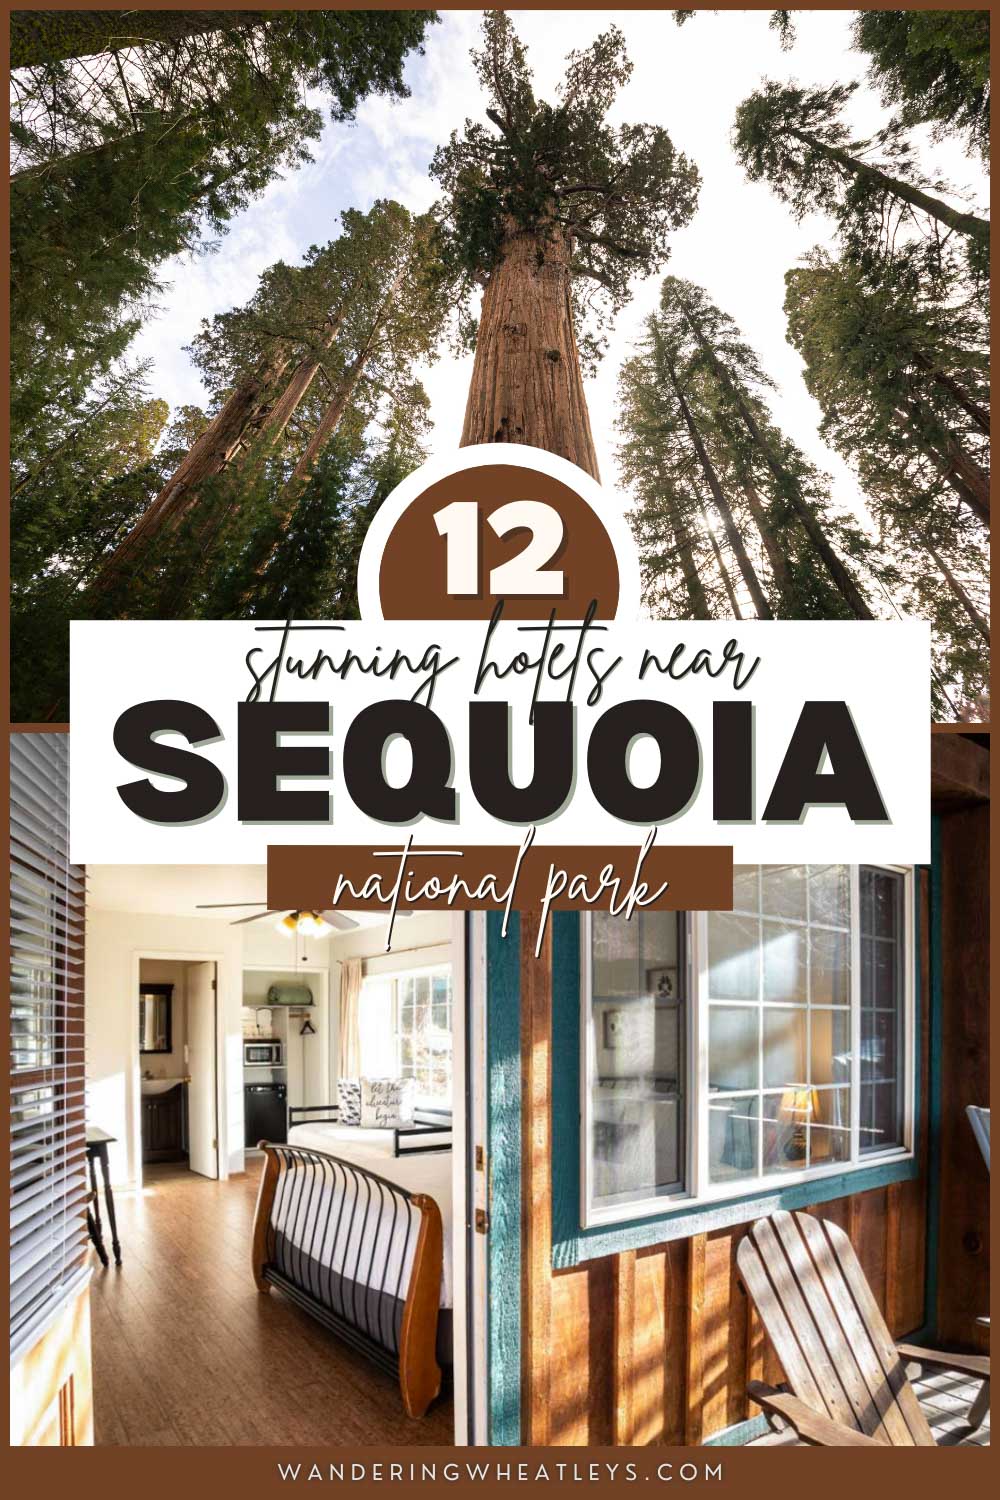 The Best Hotels near Sequoia National Park